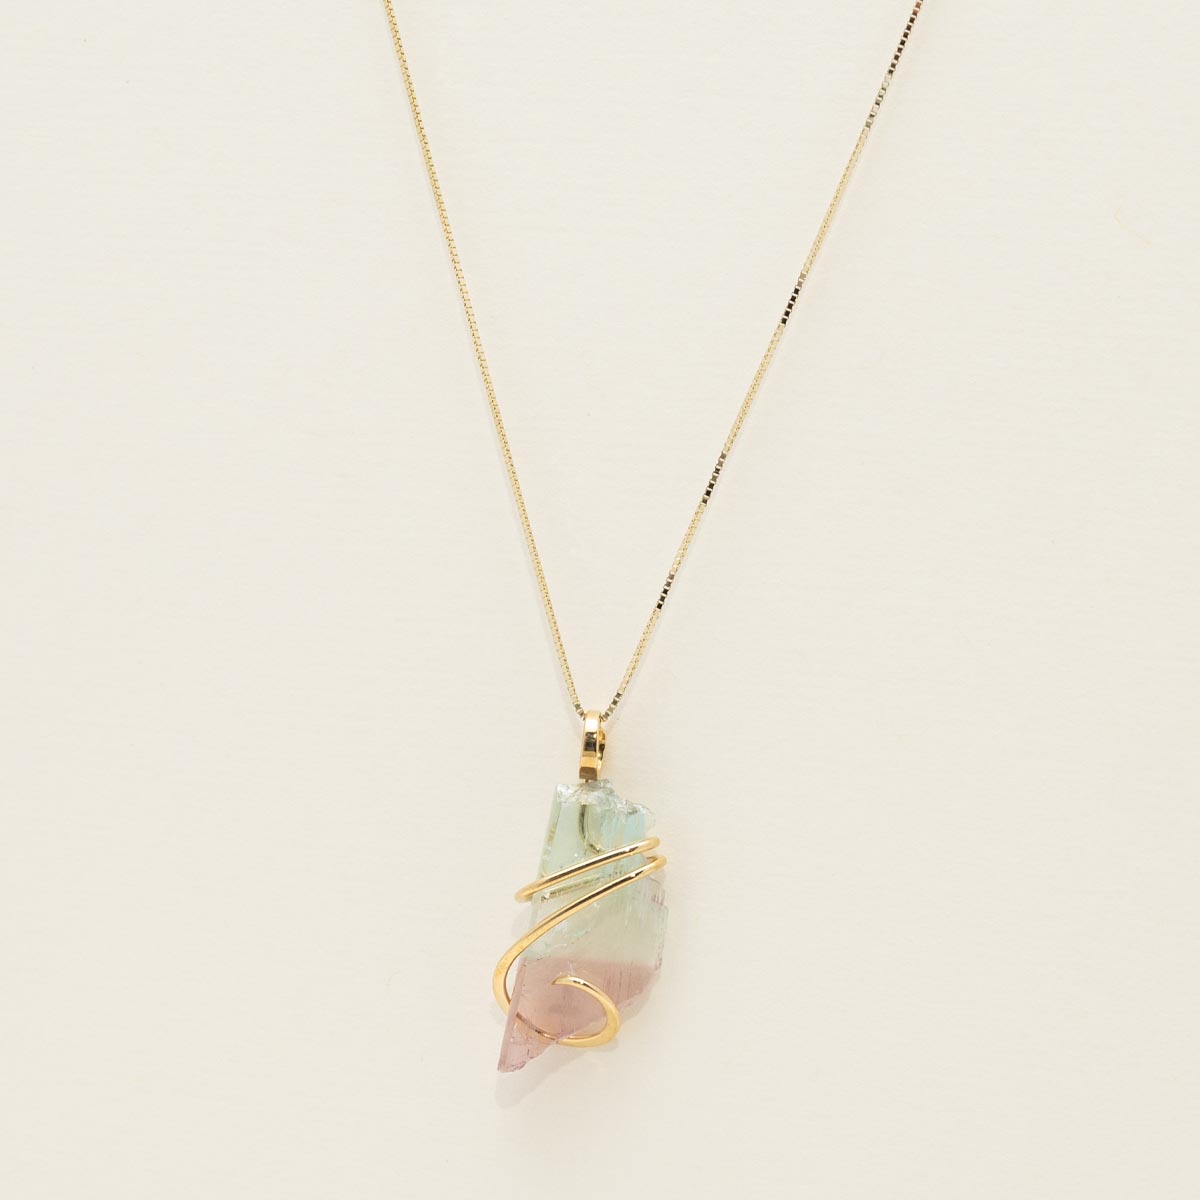 Maine Bicolor Tourmaline Necklace in 14kt Yellow Gold